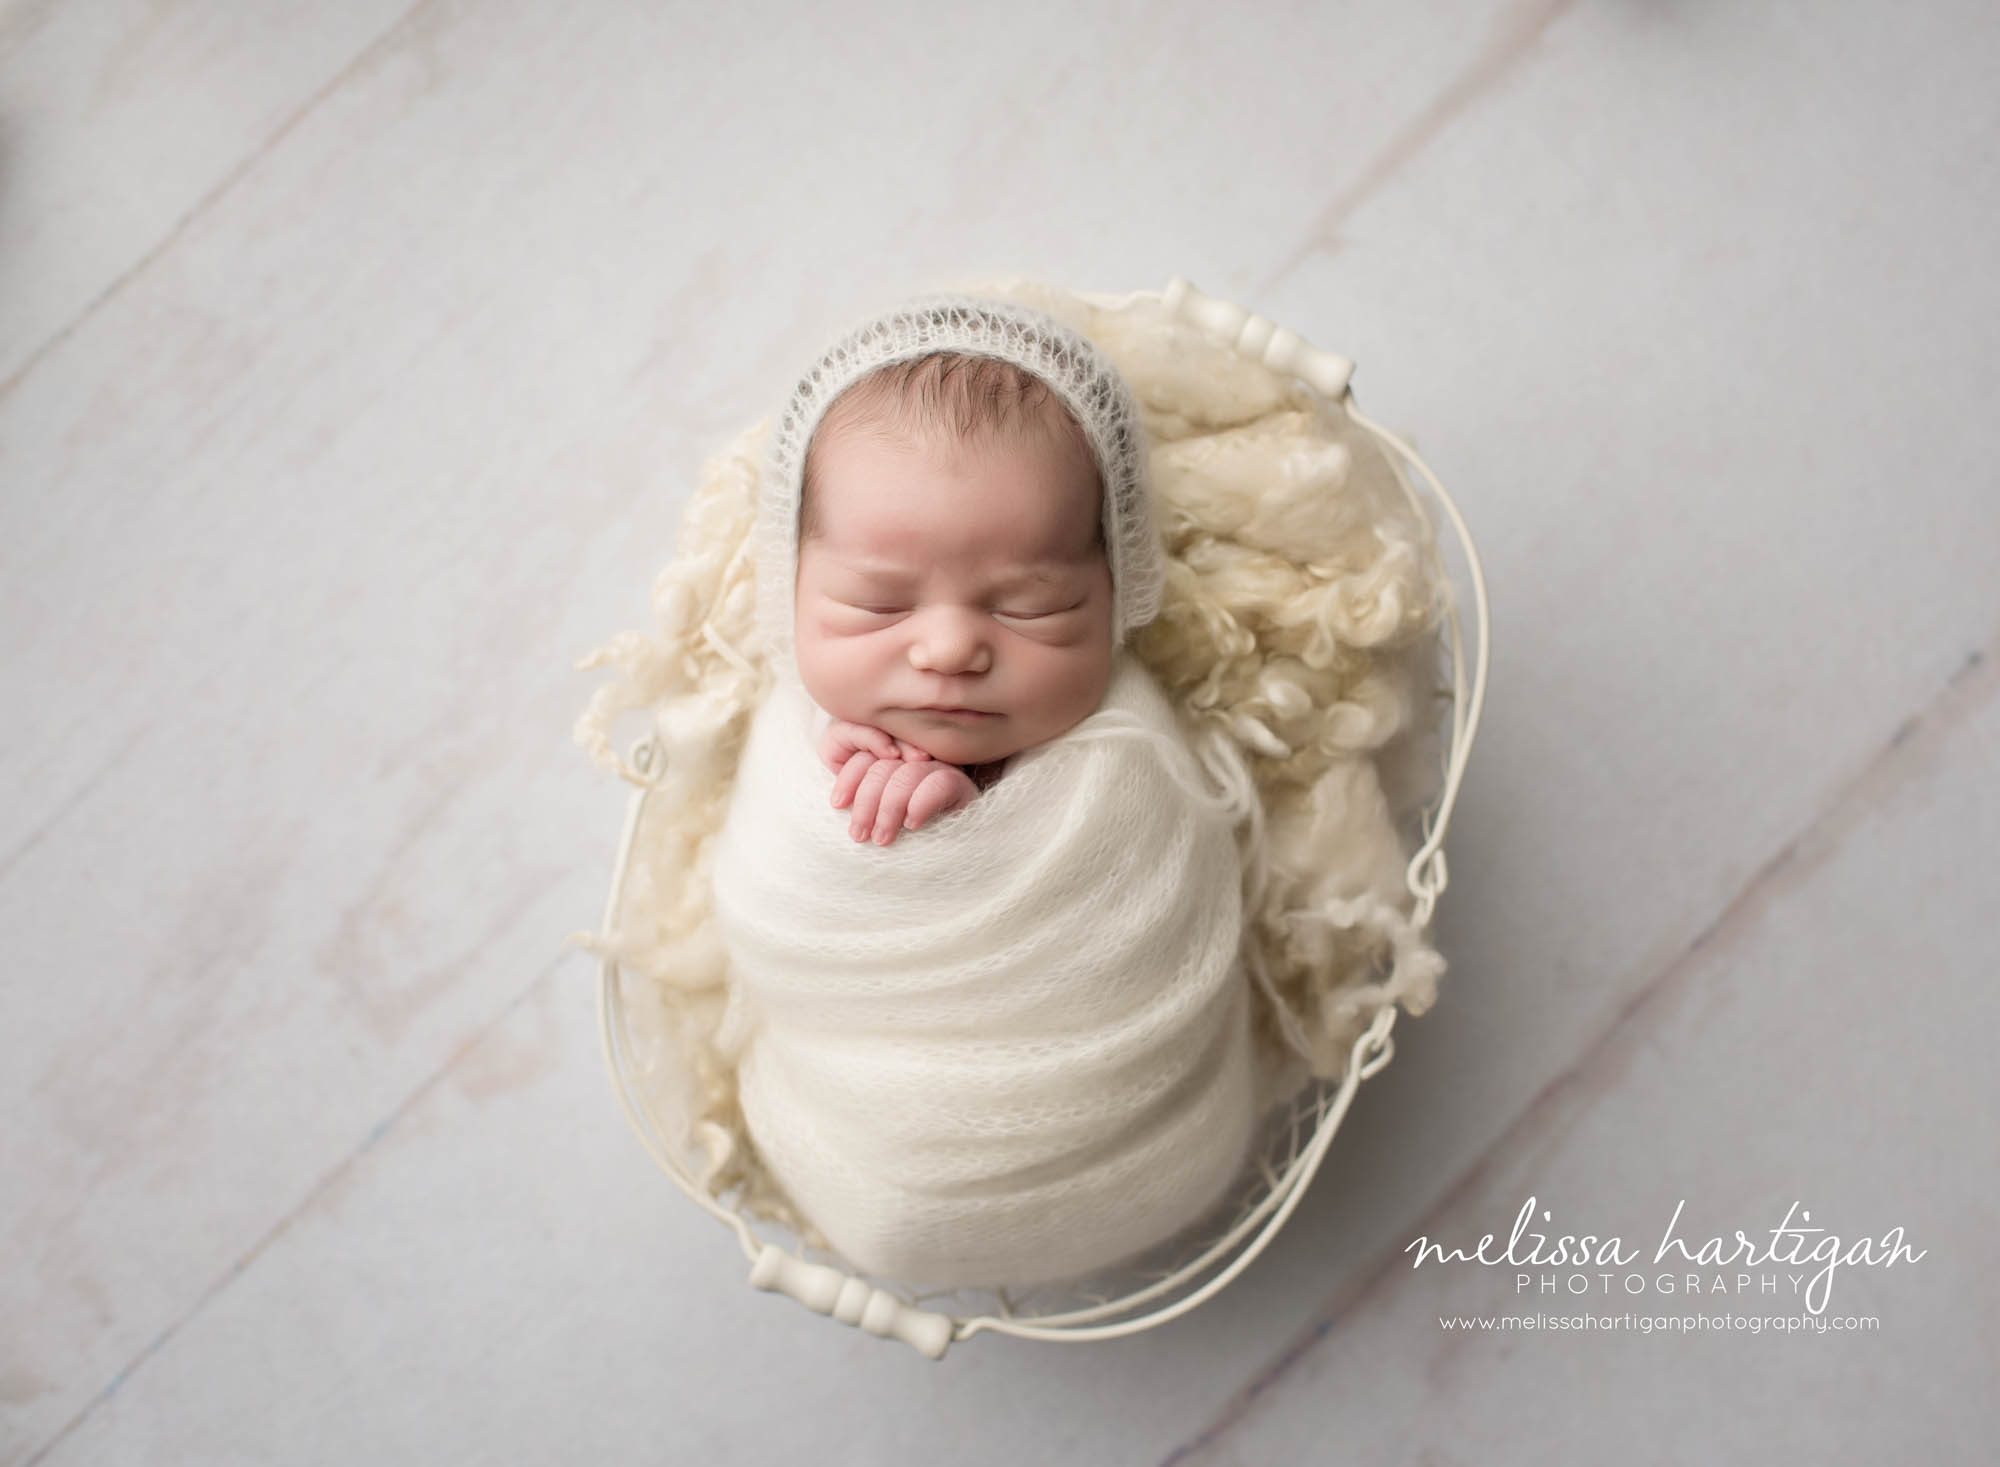 Melissa Hartigan Photography CT Newborn Photographer Emerson CT Newborn Session baby girl sleeping wrapped cream wrap wearing cream knit hat in white wired basket